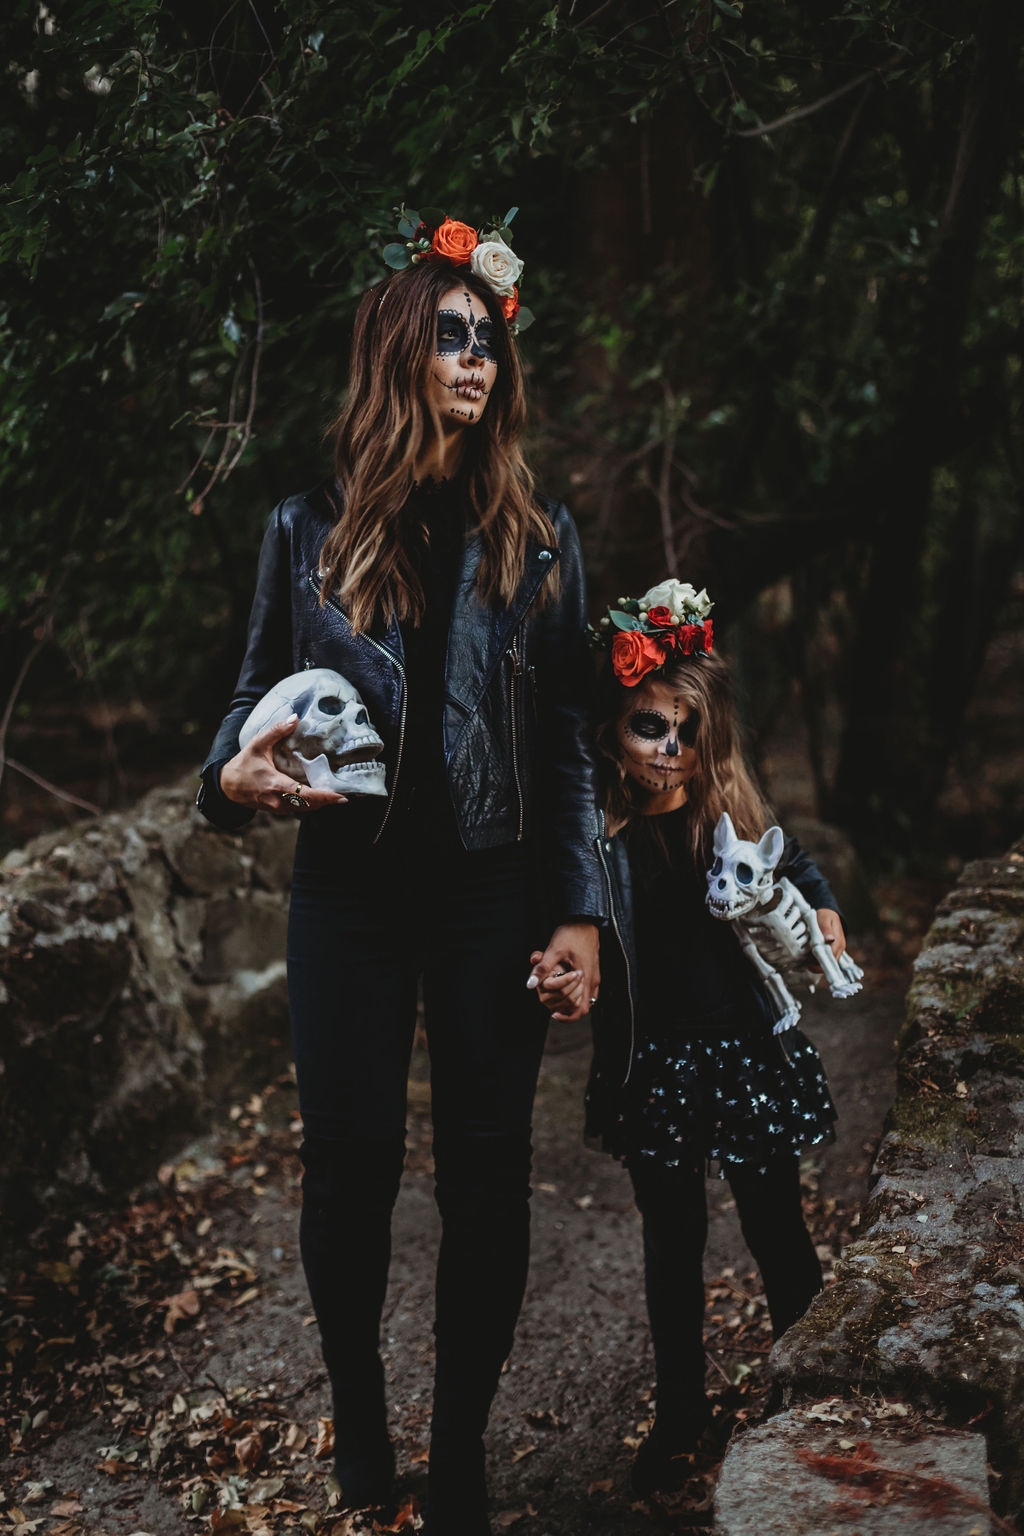 Halloween Sugar Skull Makeup by popular San Francisco beauty blog, The Girl in the Yellow Dress: image of a mom and daughter with Halloween sugar skull makeup and wearing a Gap Toddler Faux-Leather Biker Jacket, Nordstrom Tucker + Tate 'Core' Leggings, Target Cat + Jack Toddler Girls' Unity Fashion Boots, Oldnavy Crew-Neck Long-Sleeve Tee for Toddler Girls, DOMIRY Tulle Tutu Skirt for Little Girls Layered Sparkle Star Princess Ballet Dance Dress Puffy Skirt, Nordstrom BLANKNYC Tonal Star Faux Leather Moto Jacket, Nordstrom Steve Madden Jacey Over the Knee Boot, Nordstrom TopShop Joni High Waist Jeans, and ShopBop WAYF Berklin Lace Top and holding a Target Hide and Eek! Boutique Chihuahua Skeleton Decorative Halloween Prop.